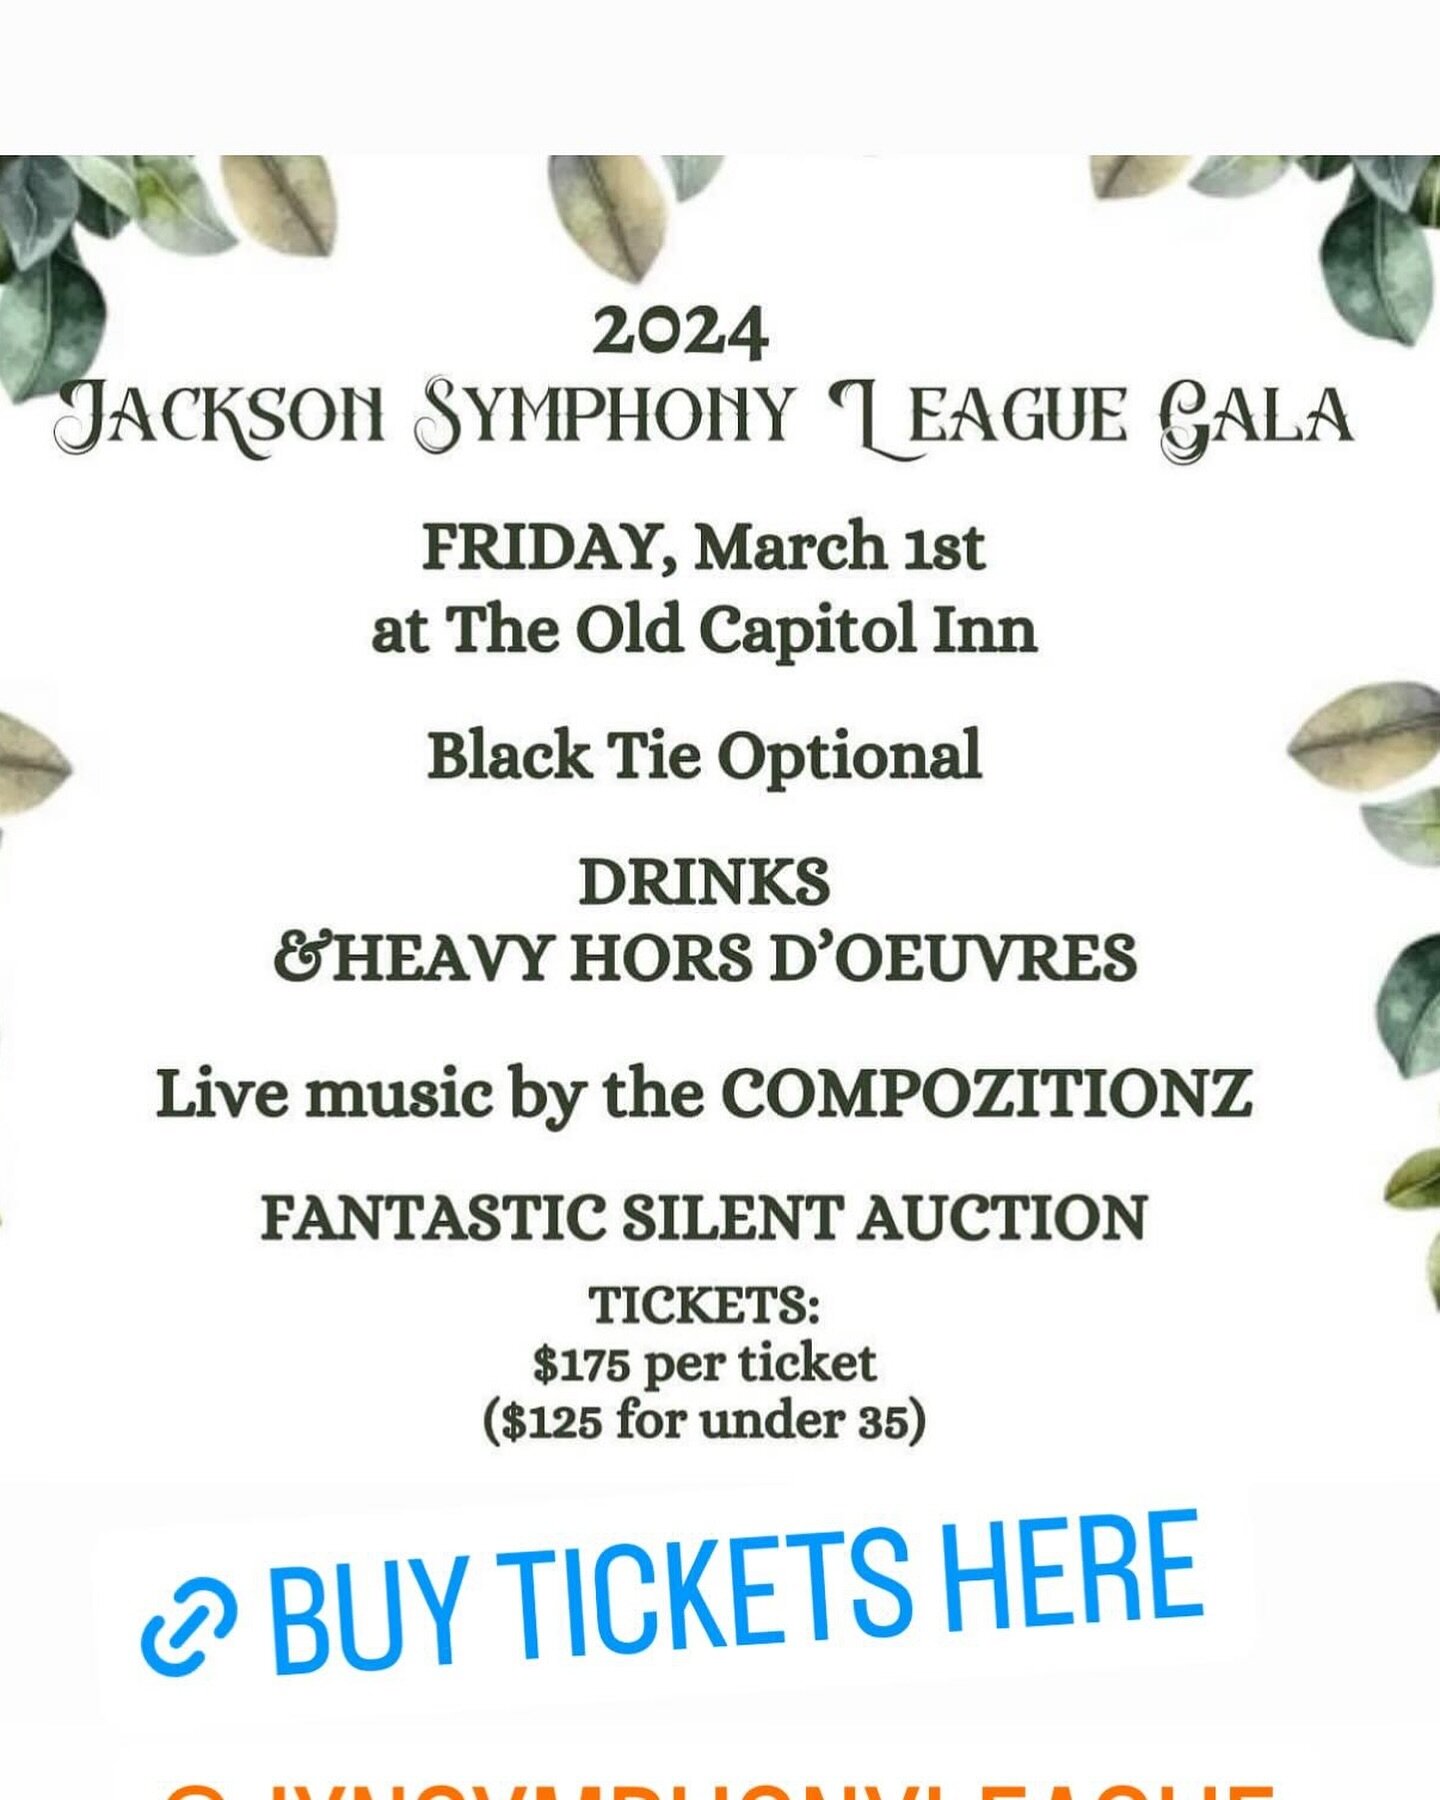 Jackson Symphony League&rsquo;s &ldquo;An Enchanted Evening&rdquo; gala is set for March 1, 2024 benefiting Mississippi Symphony Orchestra. 

Tickets are still available, please visit: Jacksonsymphonyleague.com for ticket details!
Mississippi Symphon